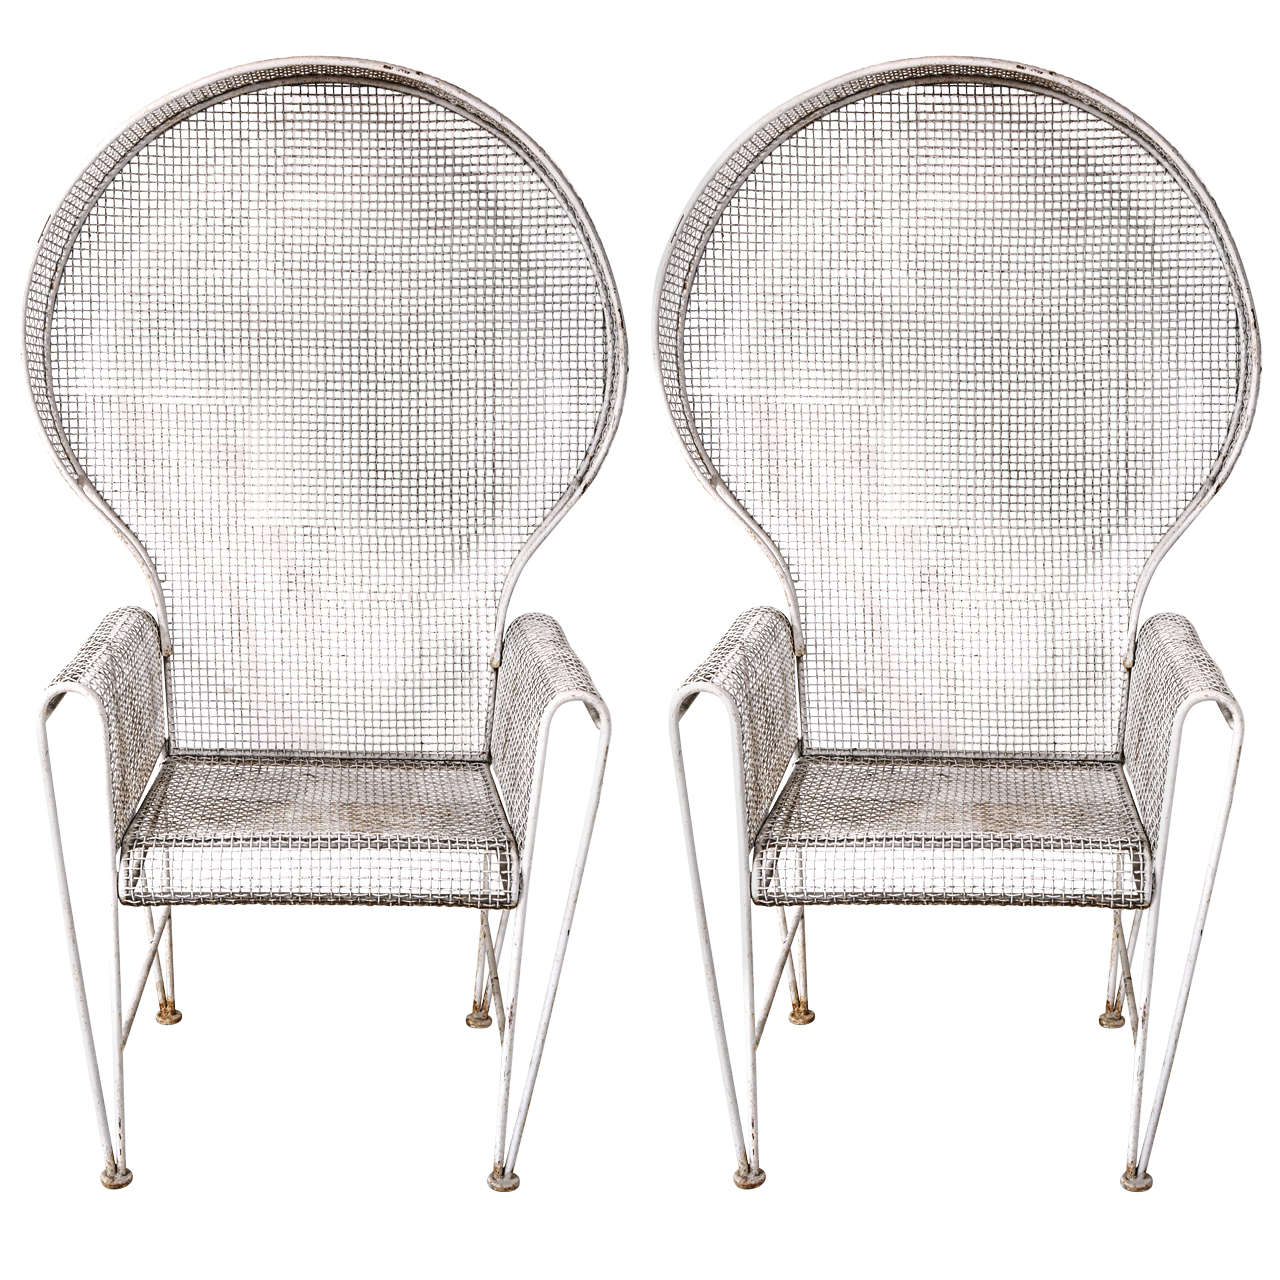 Pair of Large Hooded Wire Outdoor Chairs